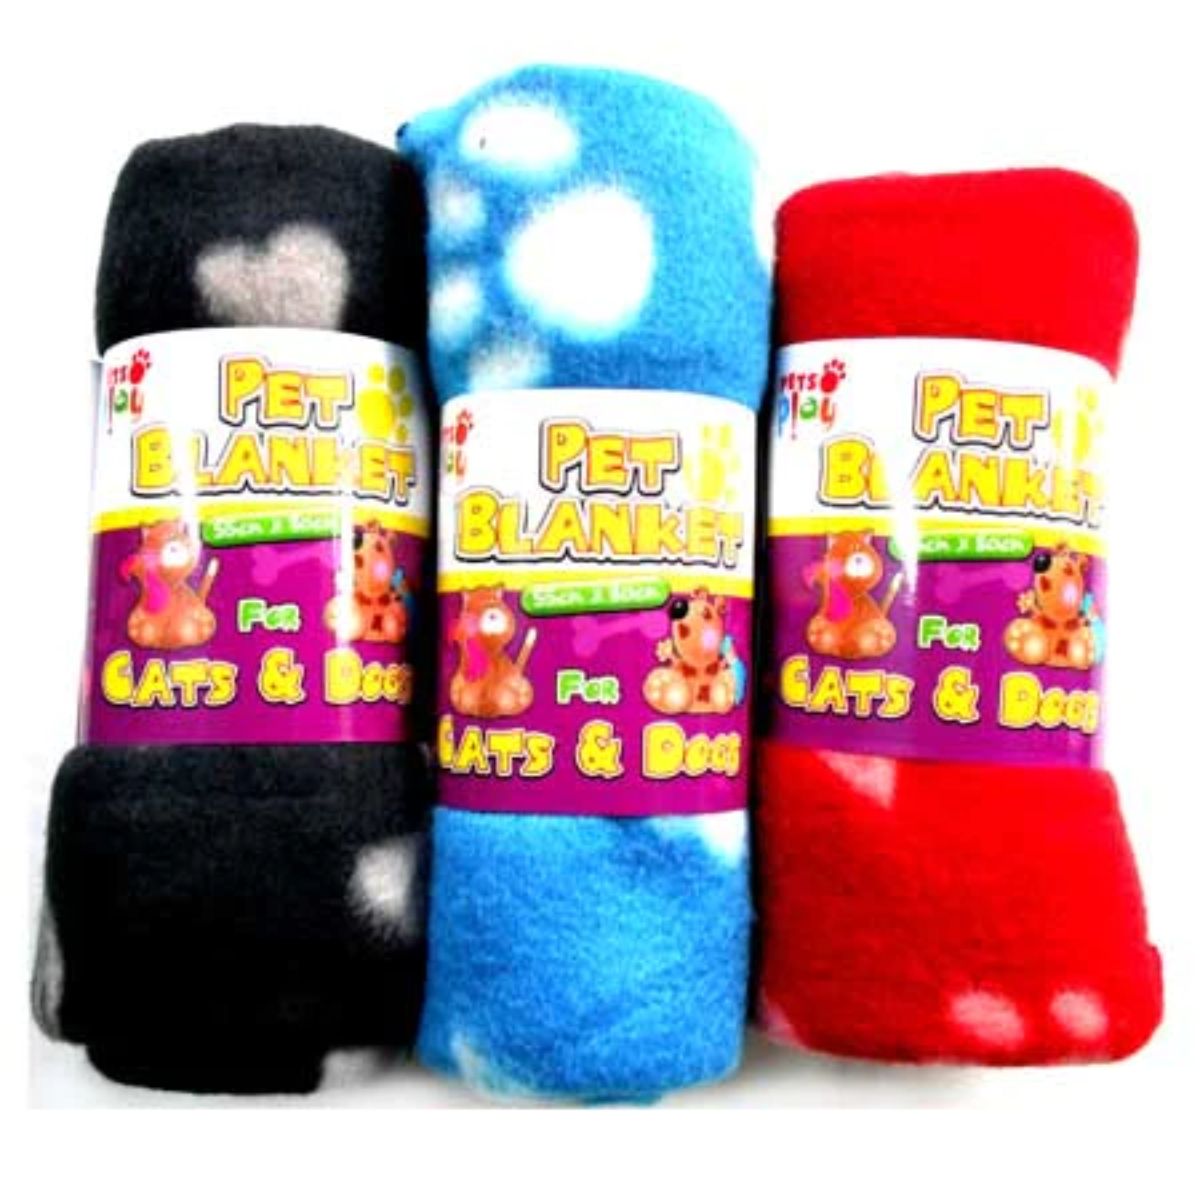 Three Pets Play - Pet Blankets for Cats & Dogs - 55cm x 80cm in different colors.